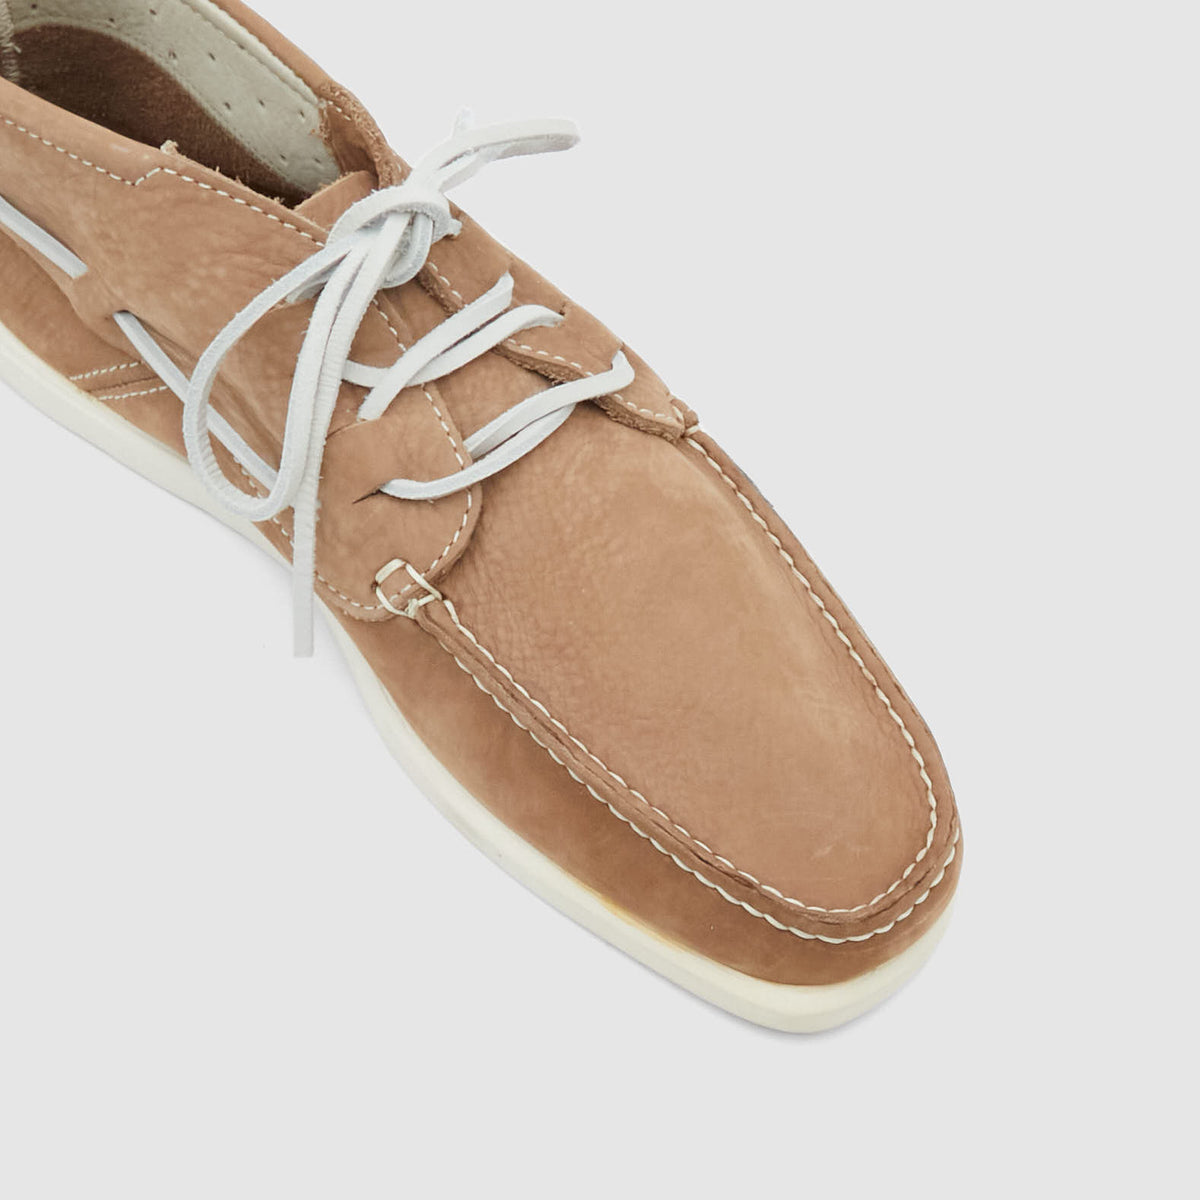 n.d.c. made by hand Alithia High Nubuk Boat Shoes